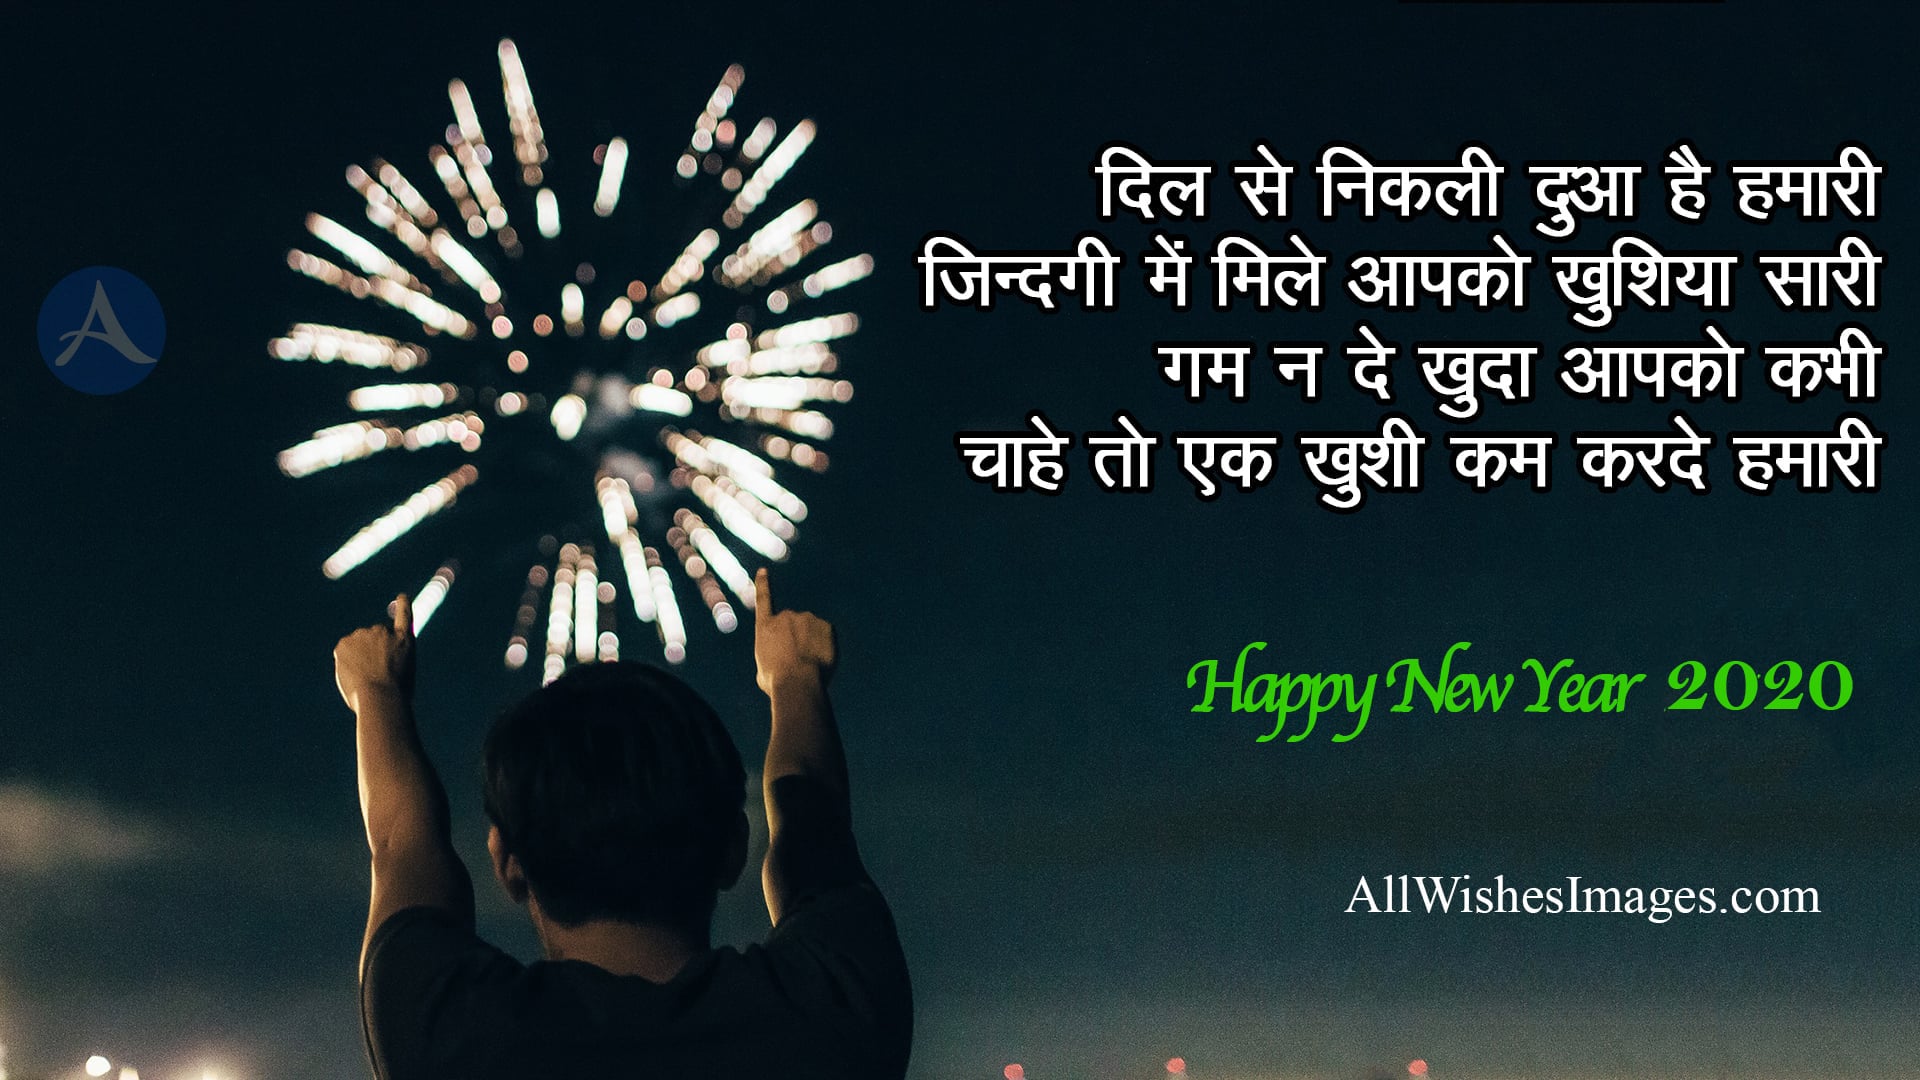 Happy New Year Hindi Greetings With Hindi Font Shayari Images - All Wishes  Images - Images for WhatsApp